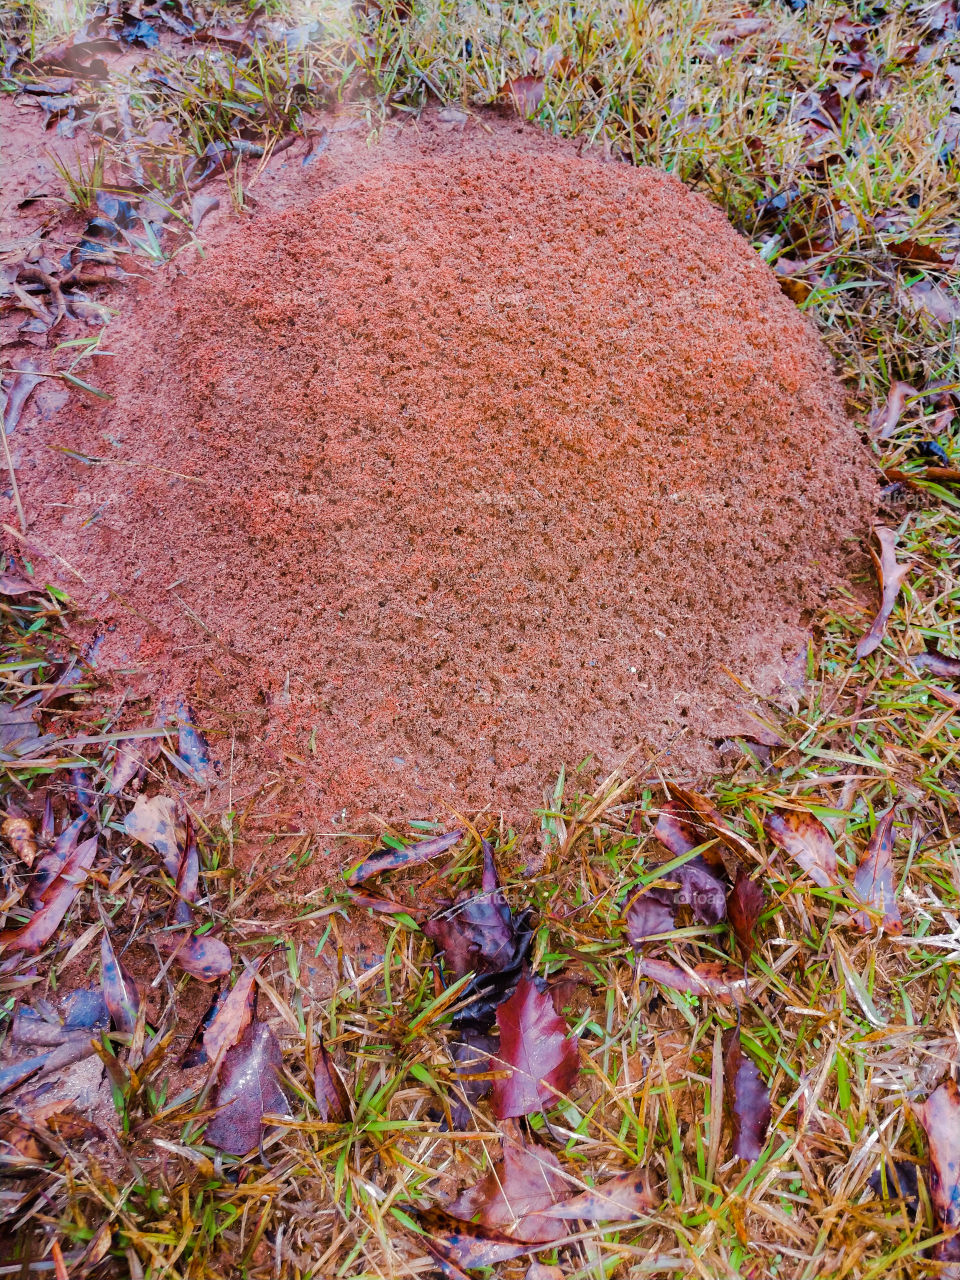 Ant bed